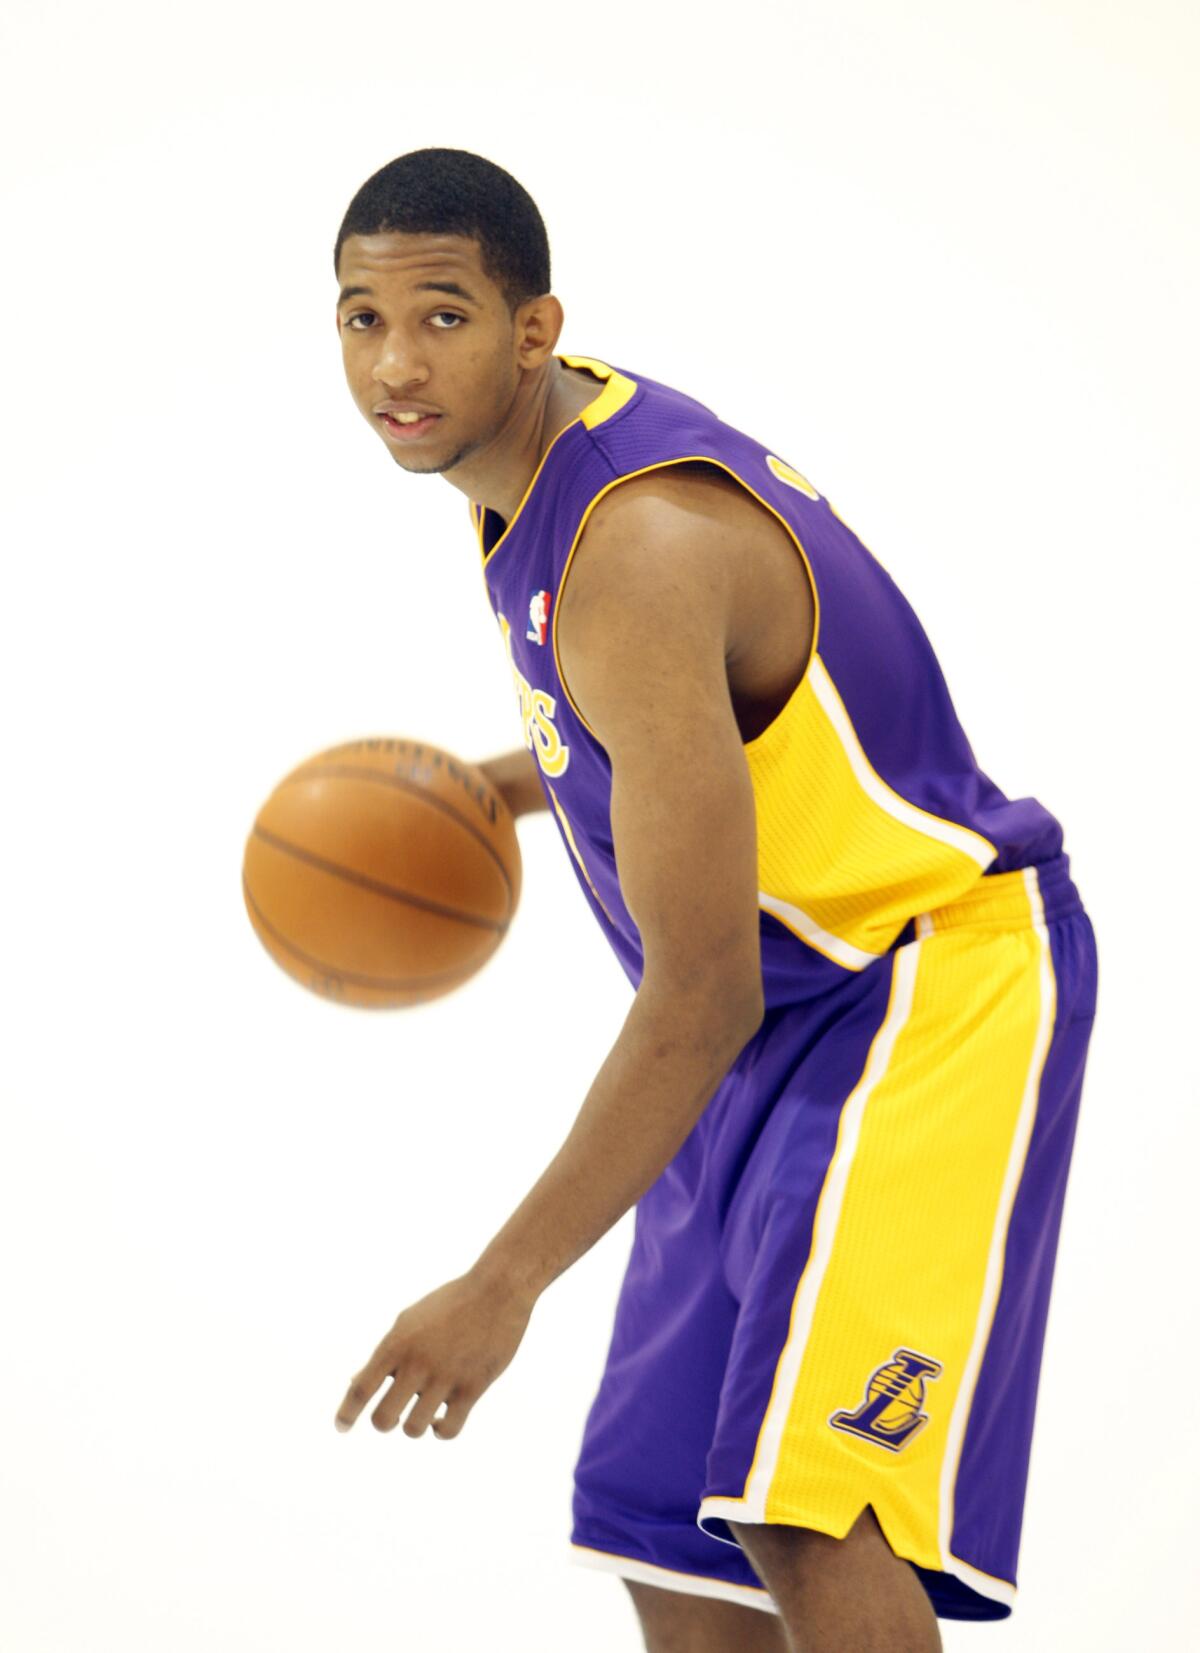 Darius Morris is holding the basketball while in his Lakers uniform